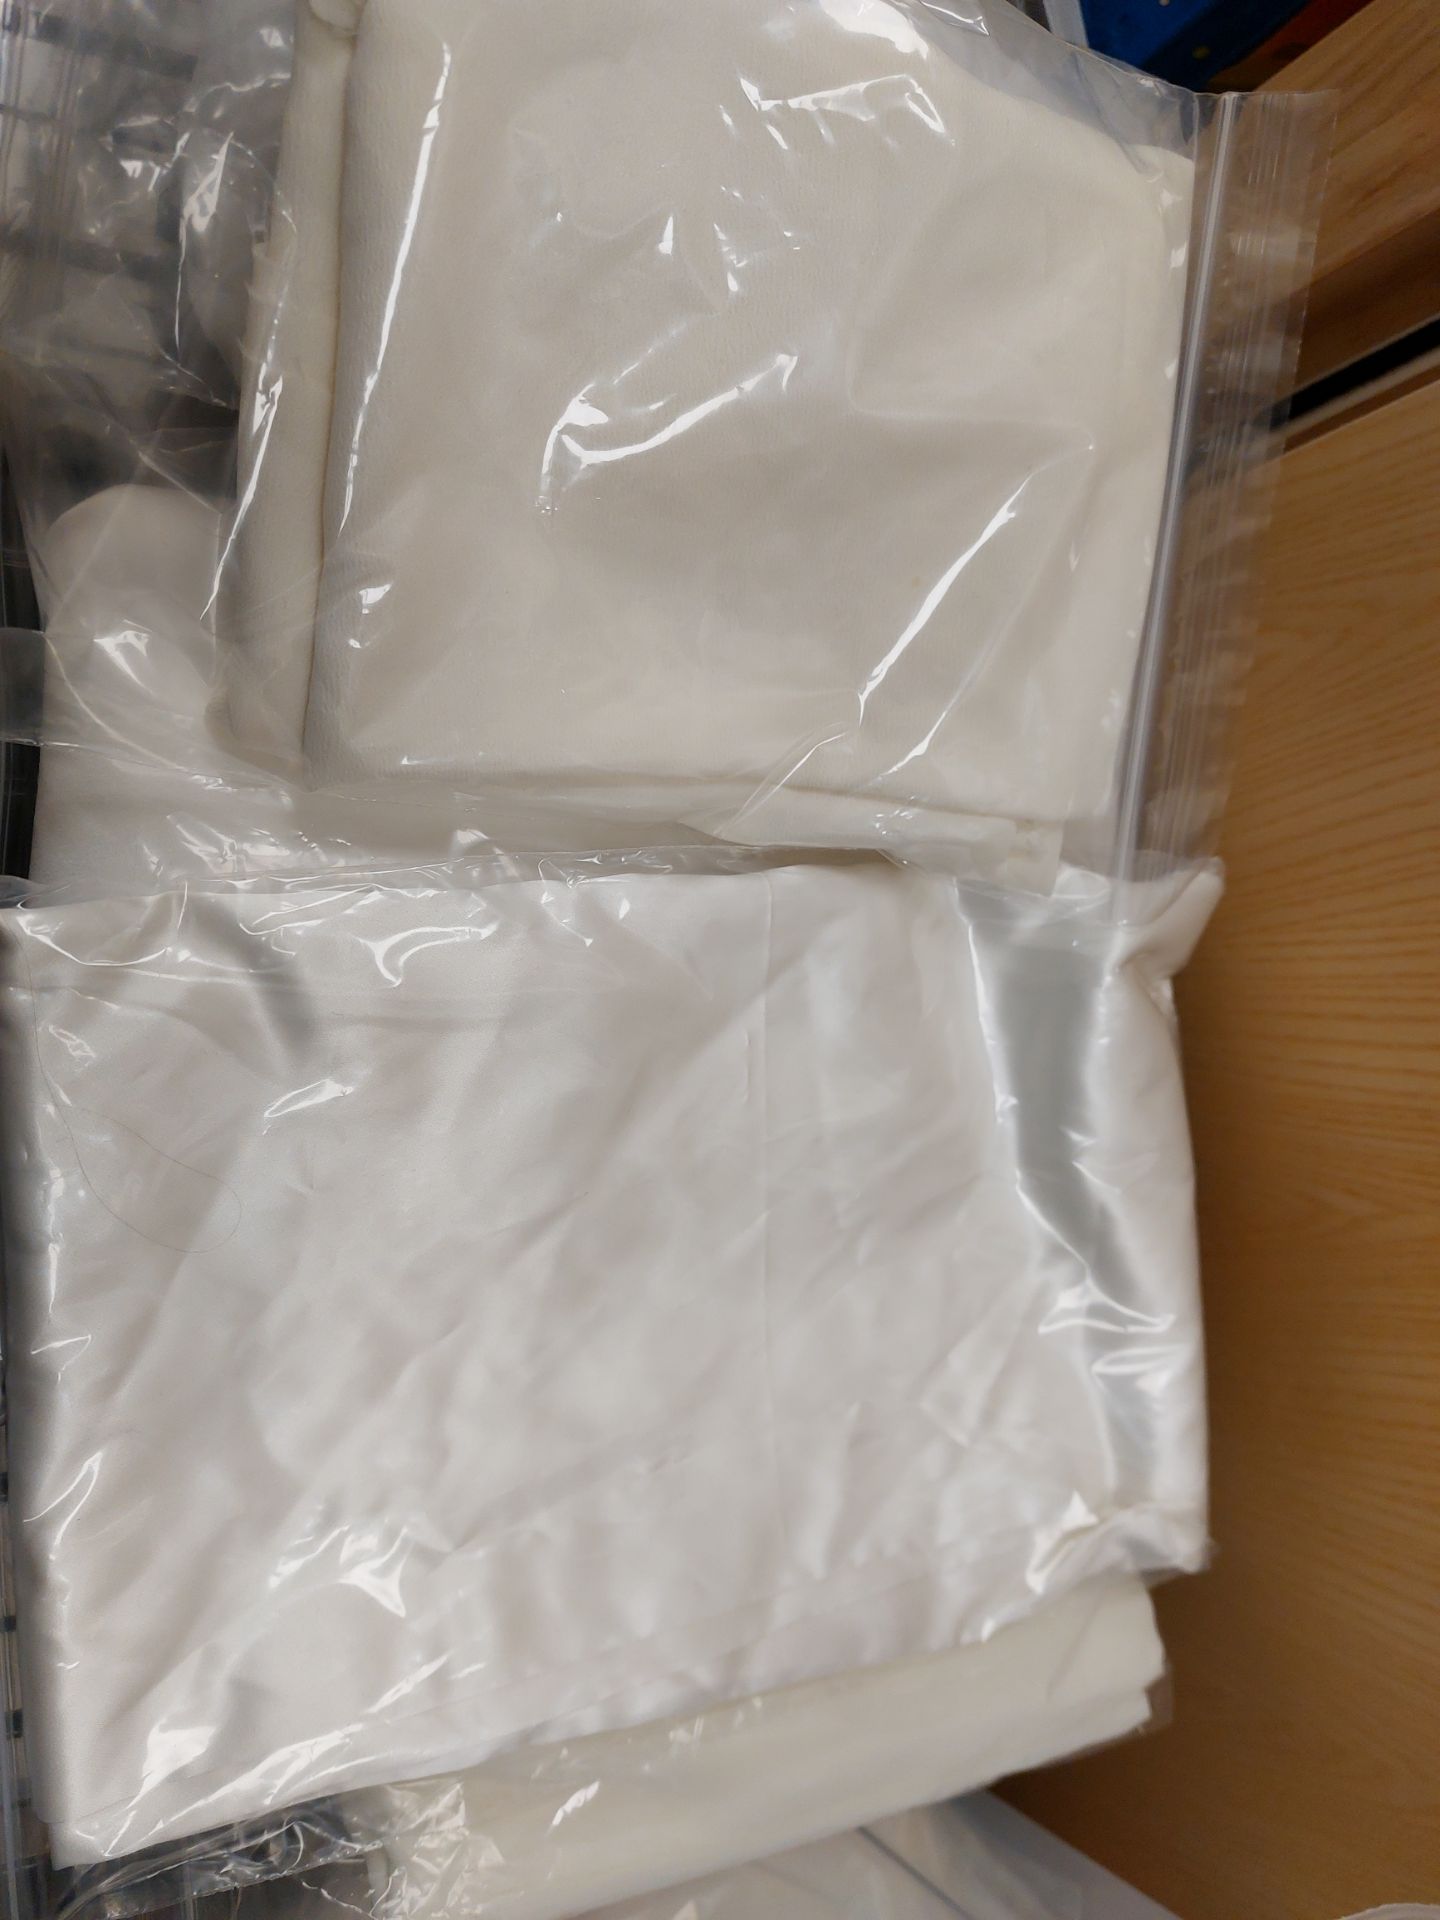 Quantity of Ivory Or White Fabric Bundles - Image 2 of 8